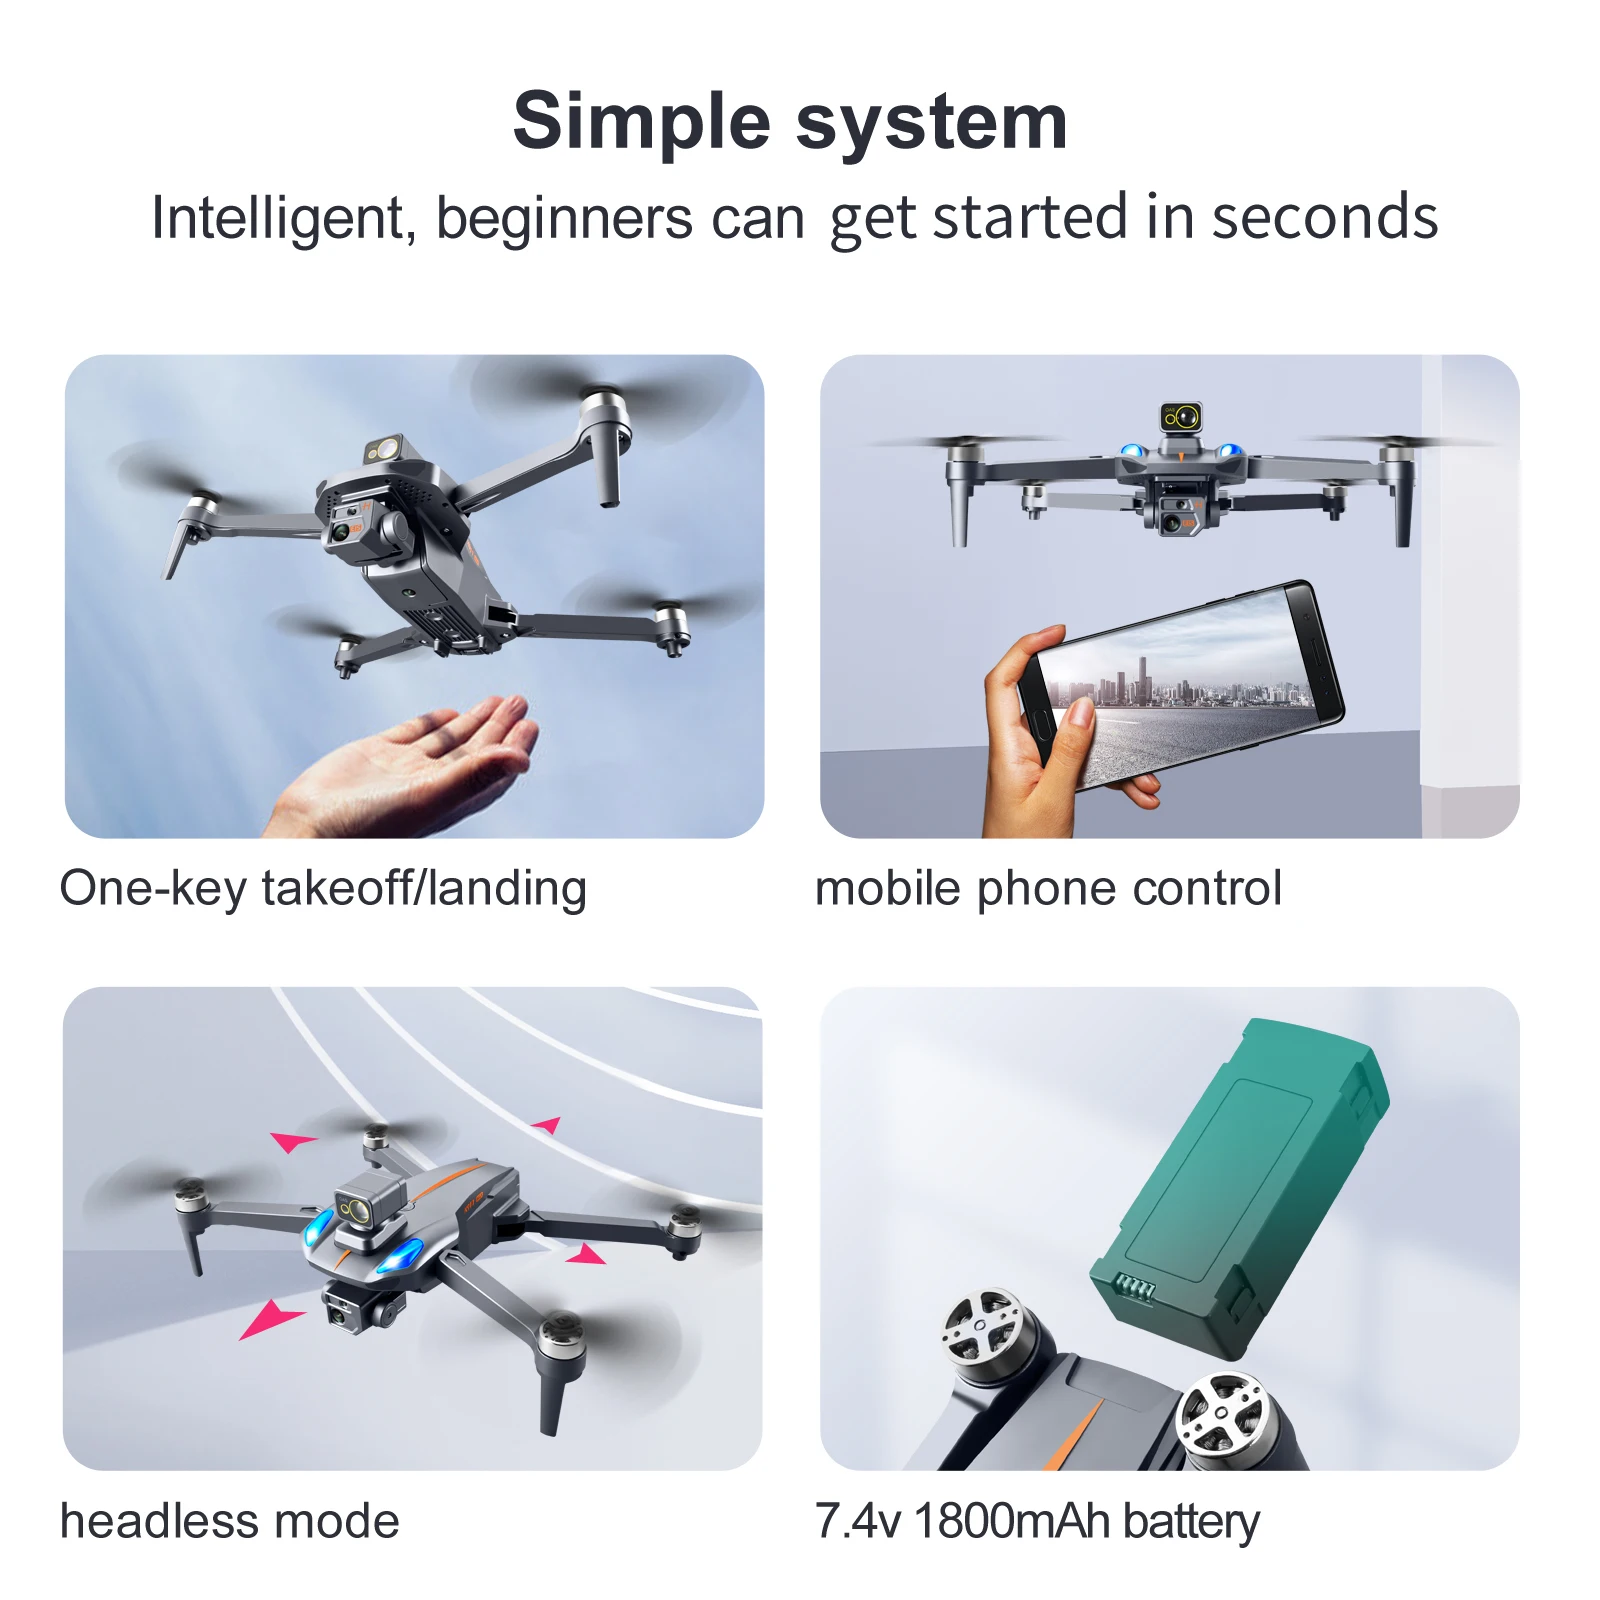 K911 MAX GPS Drone, simple system Intelligent; beginners can started in seconds One-key takeoffllanding mobile phone